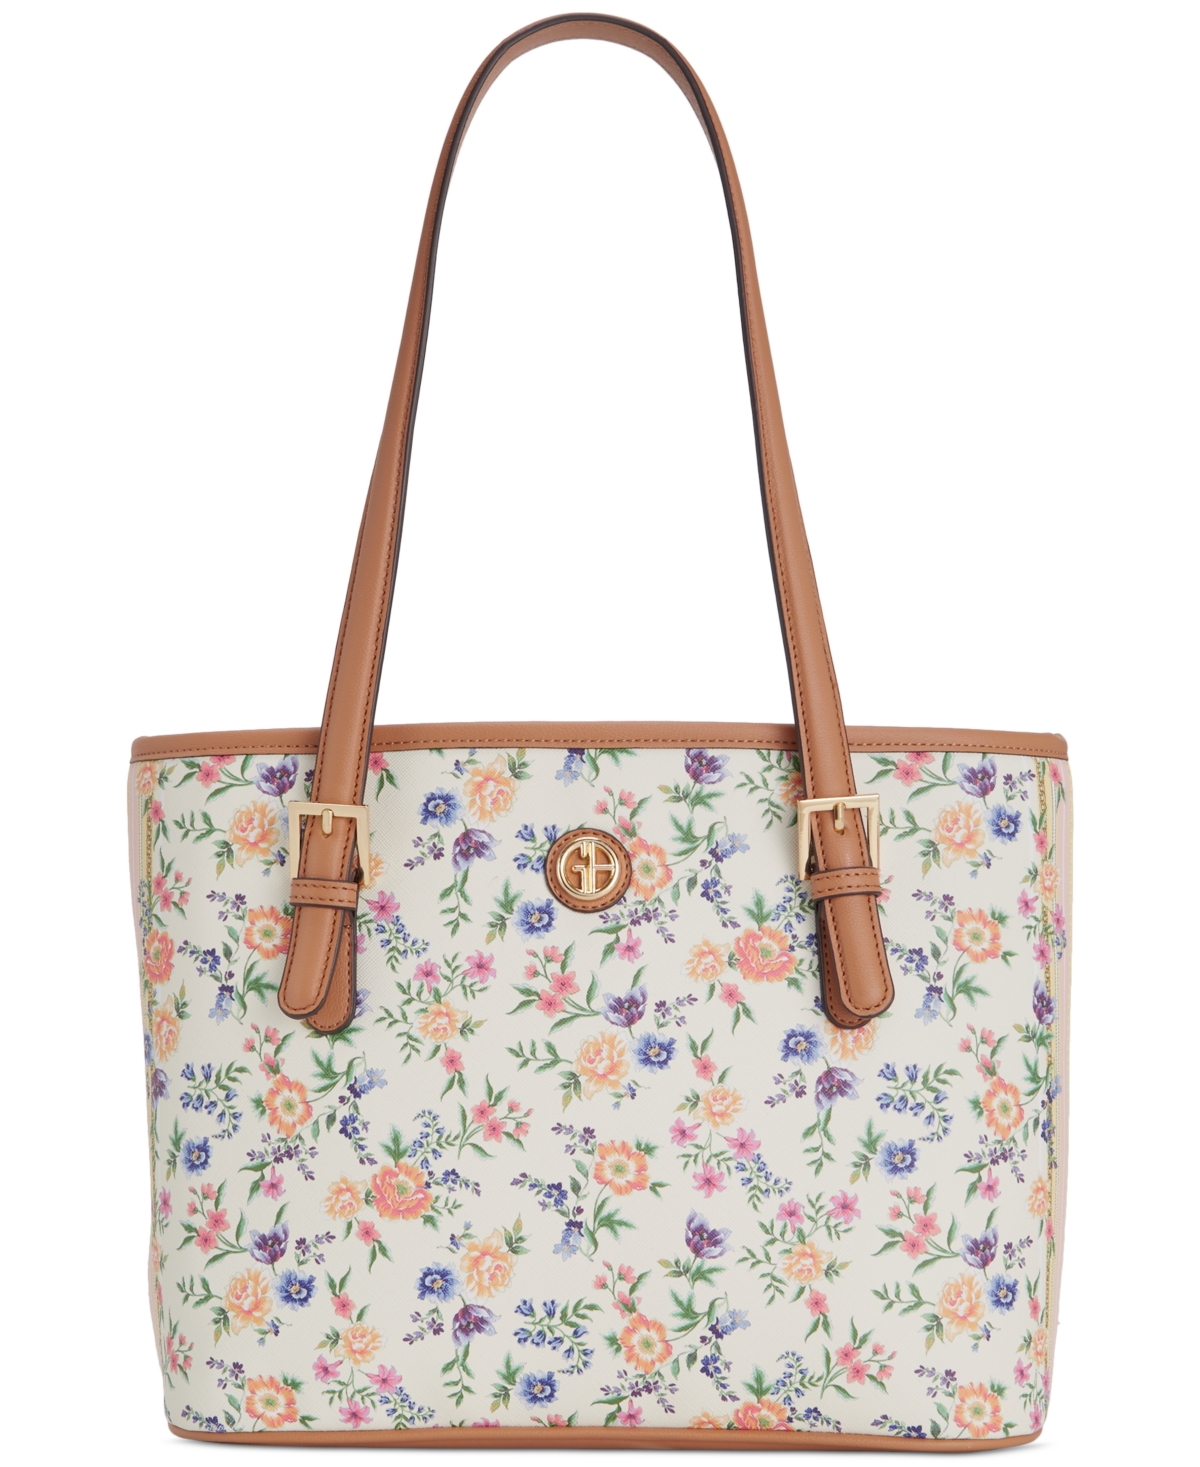 Saffiano Pastel Floral Large Tote, Created for Macy's - Floral Multi